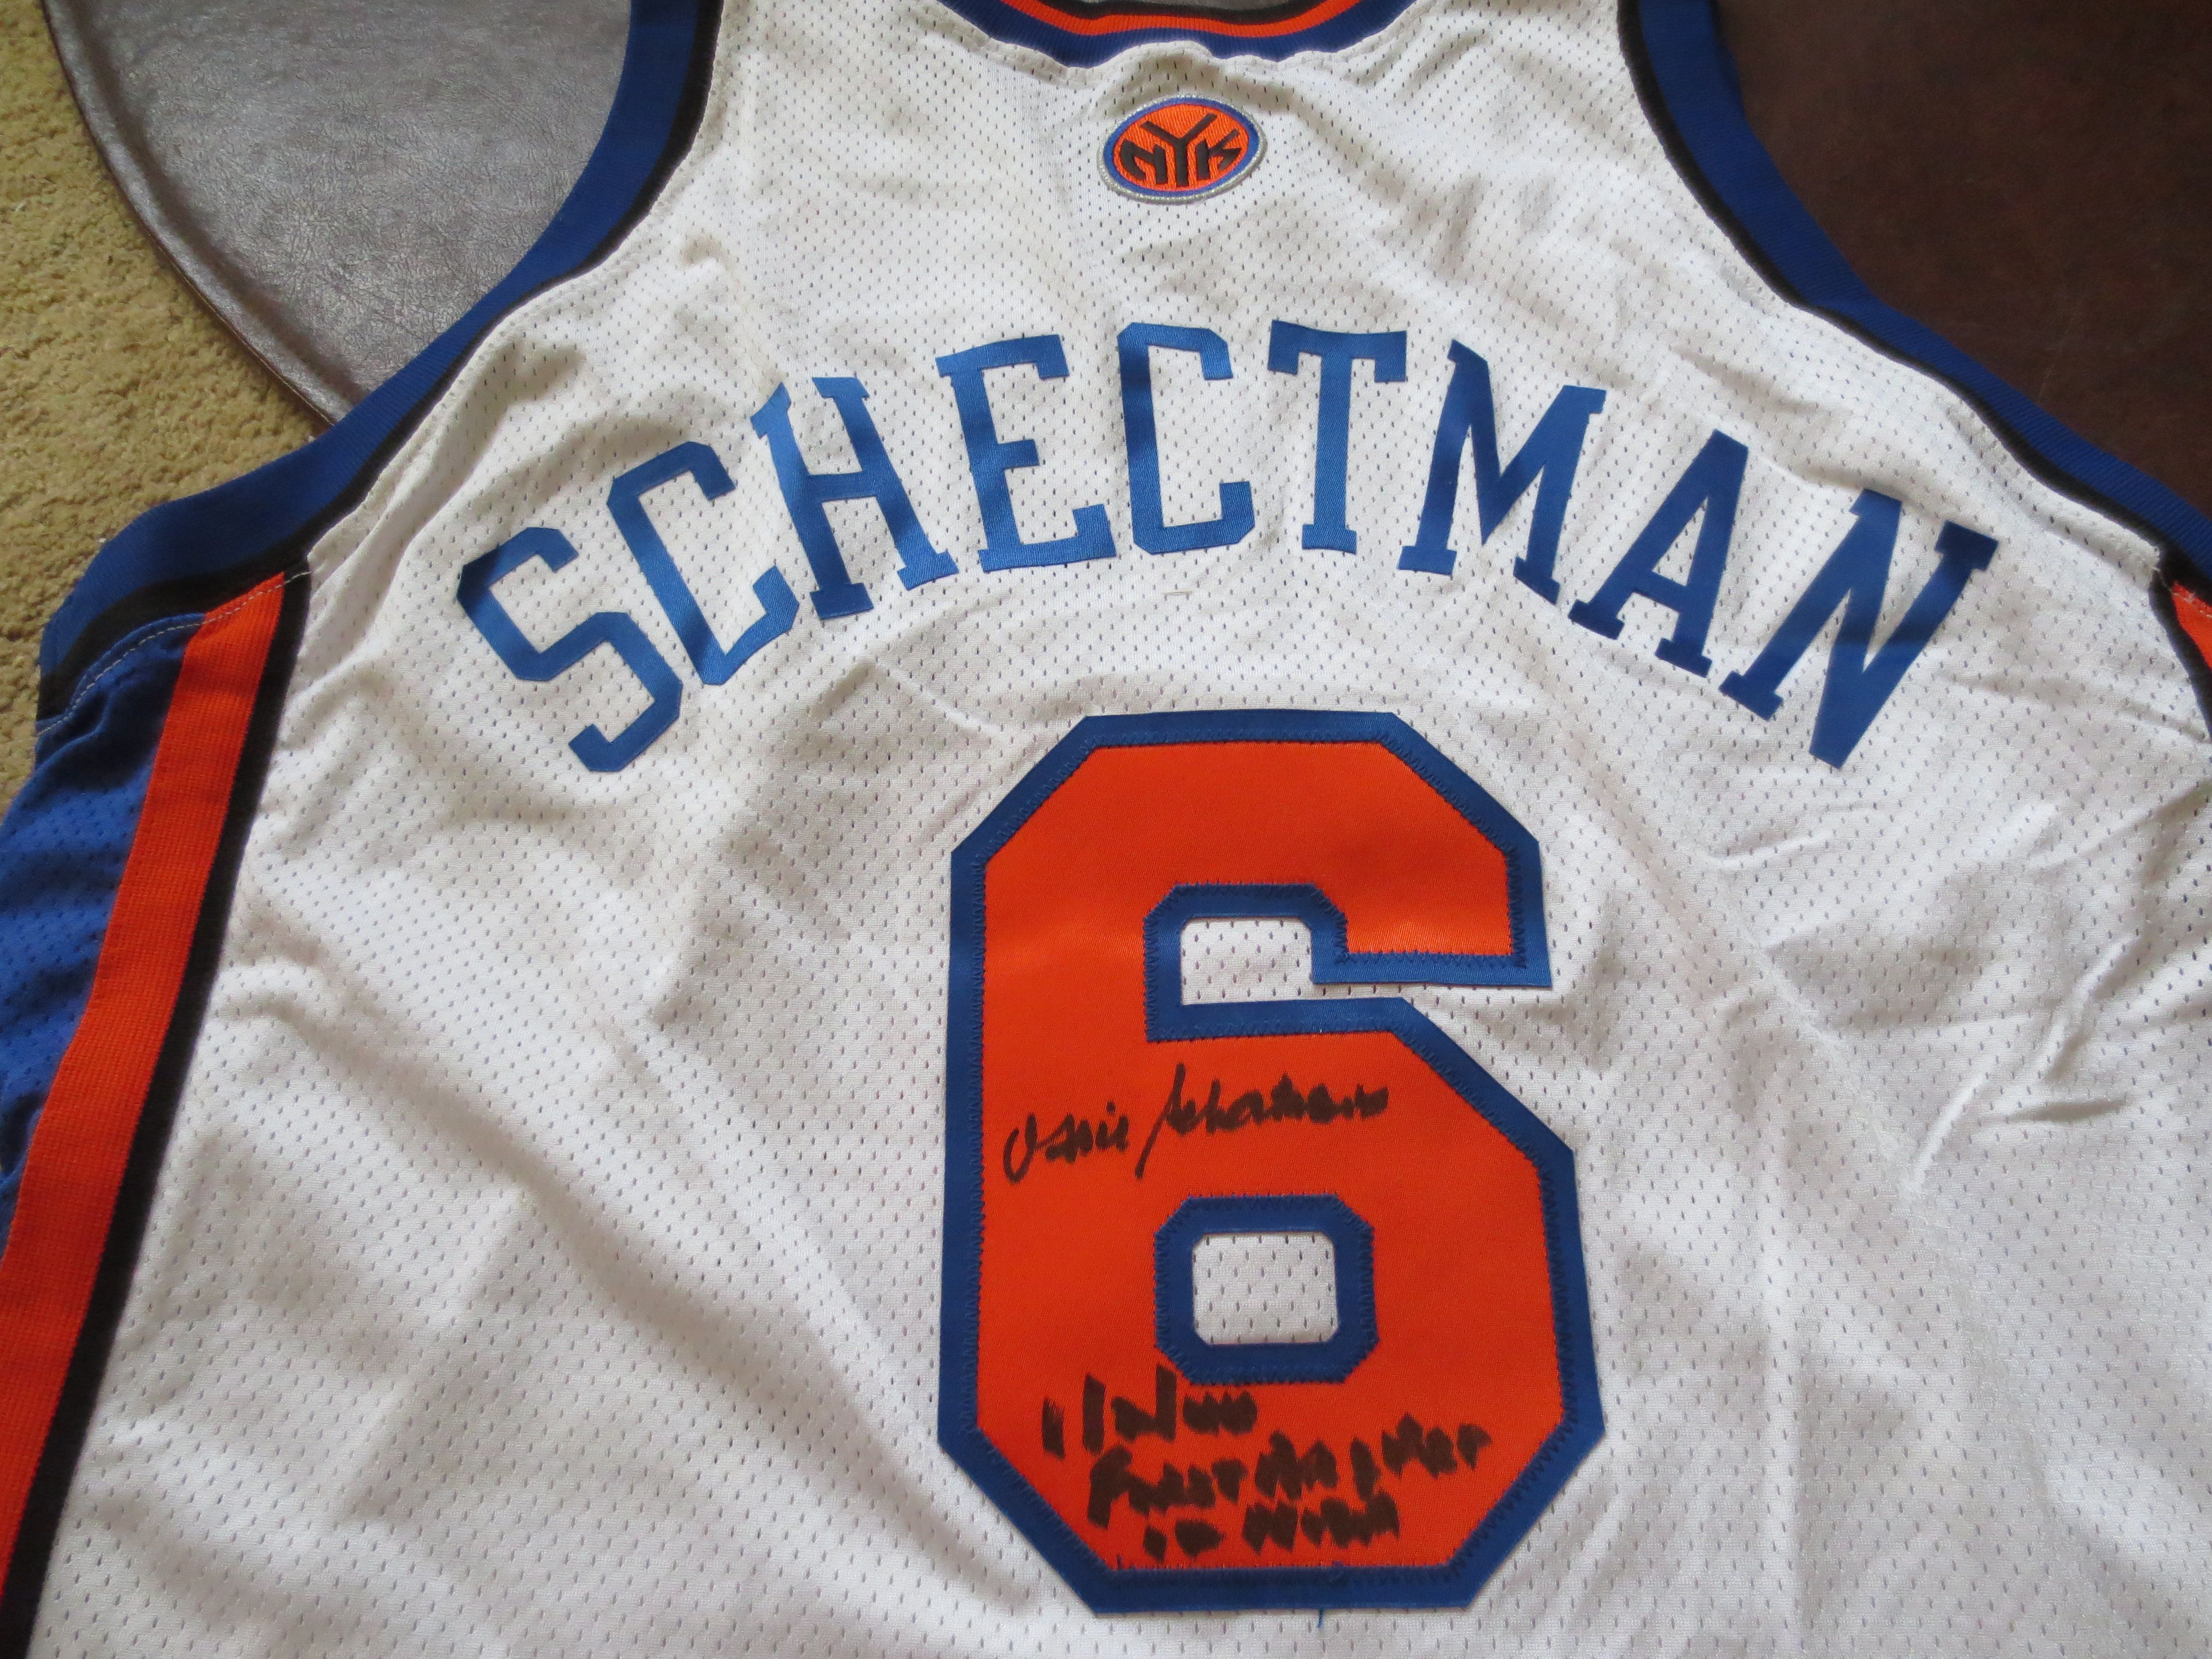 Schuckman: Reeves' signed jersey is priceless commodity, Sports